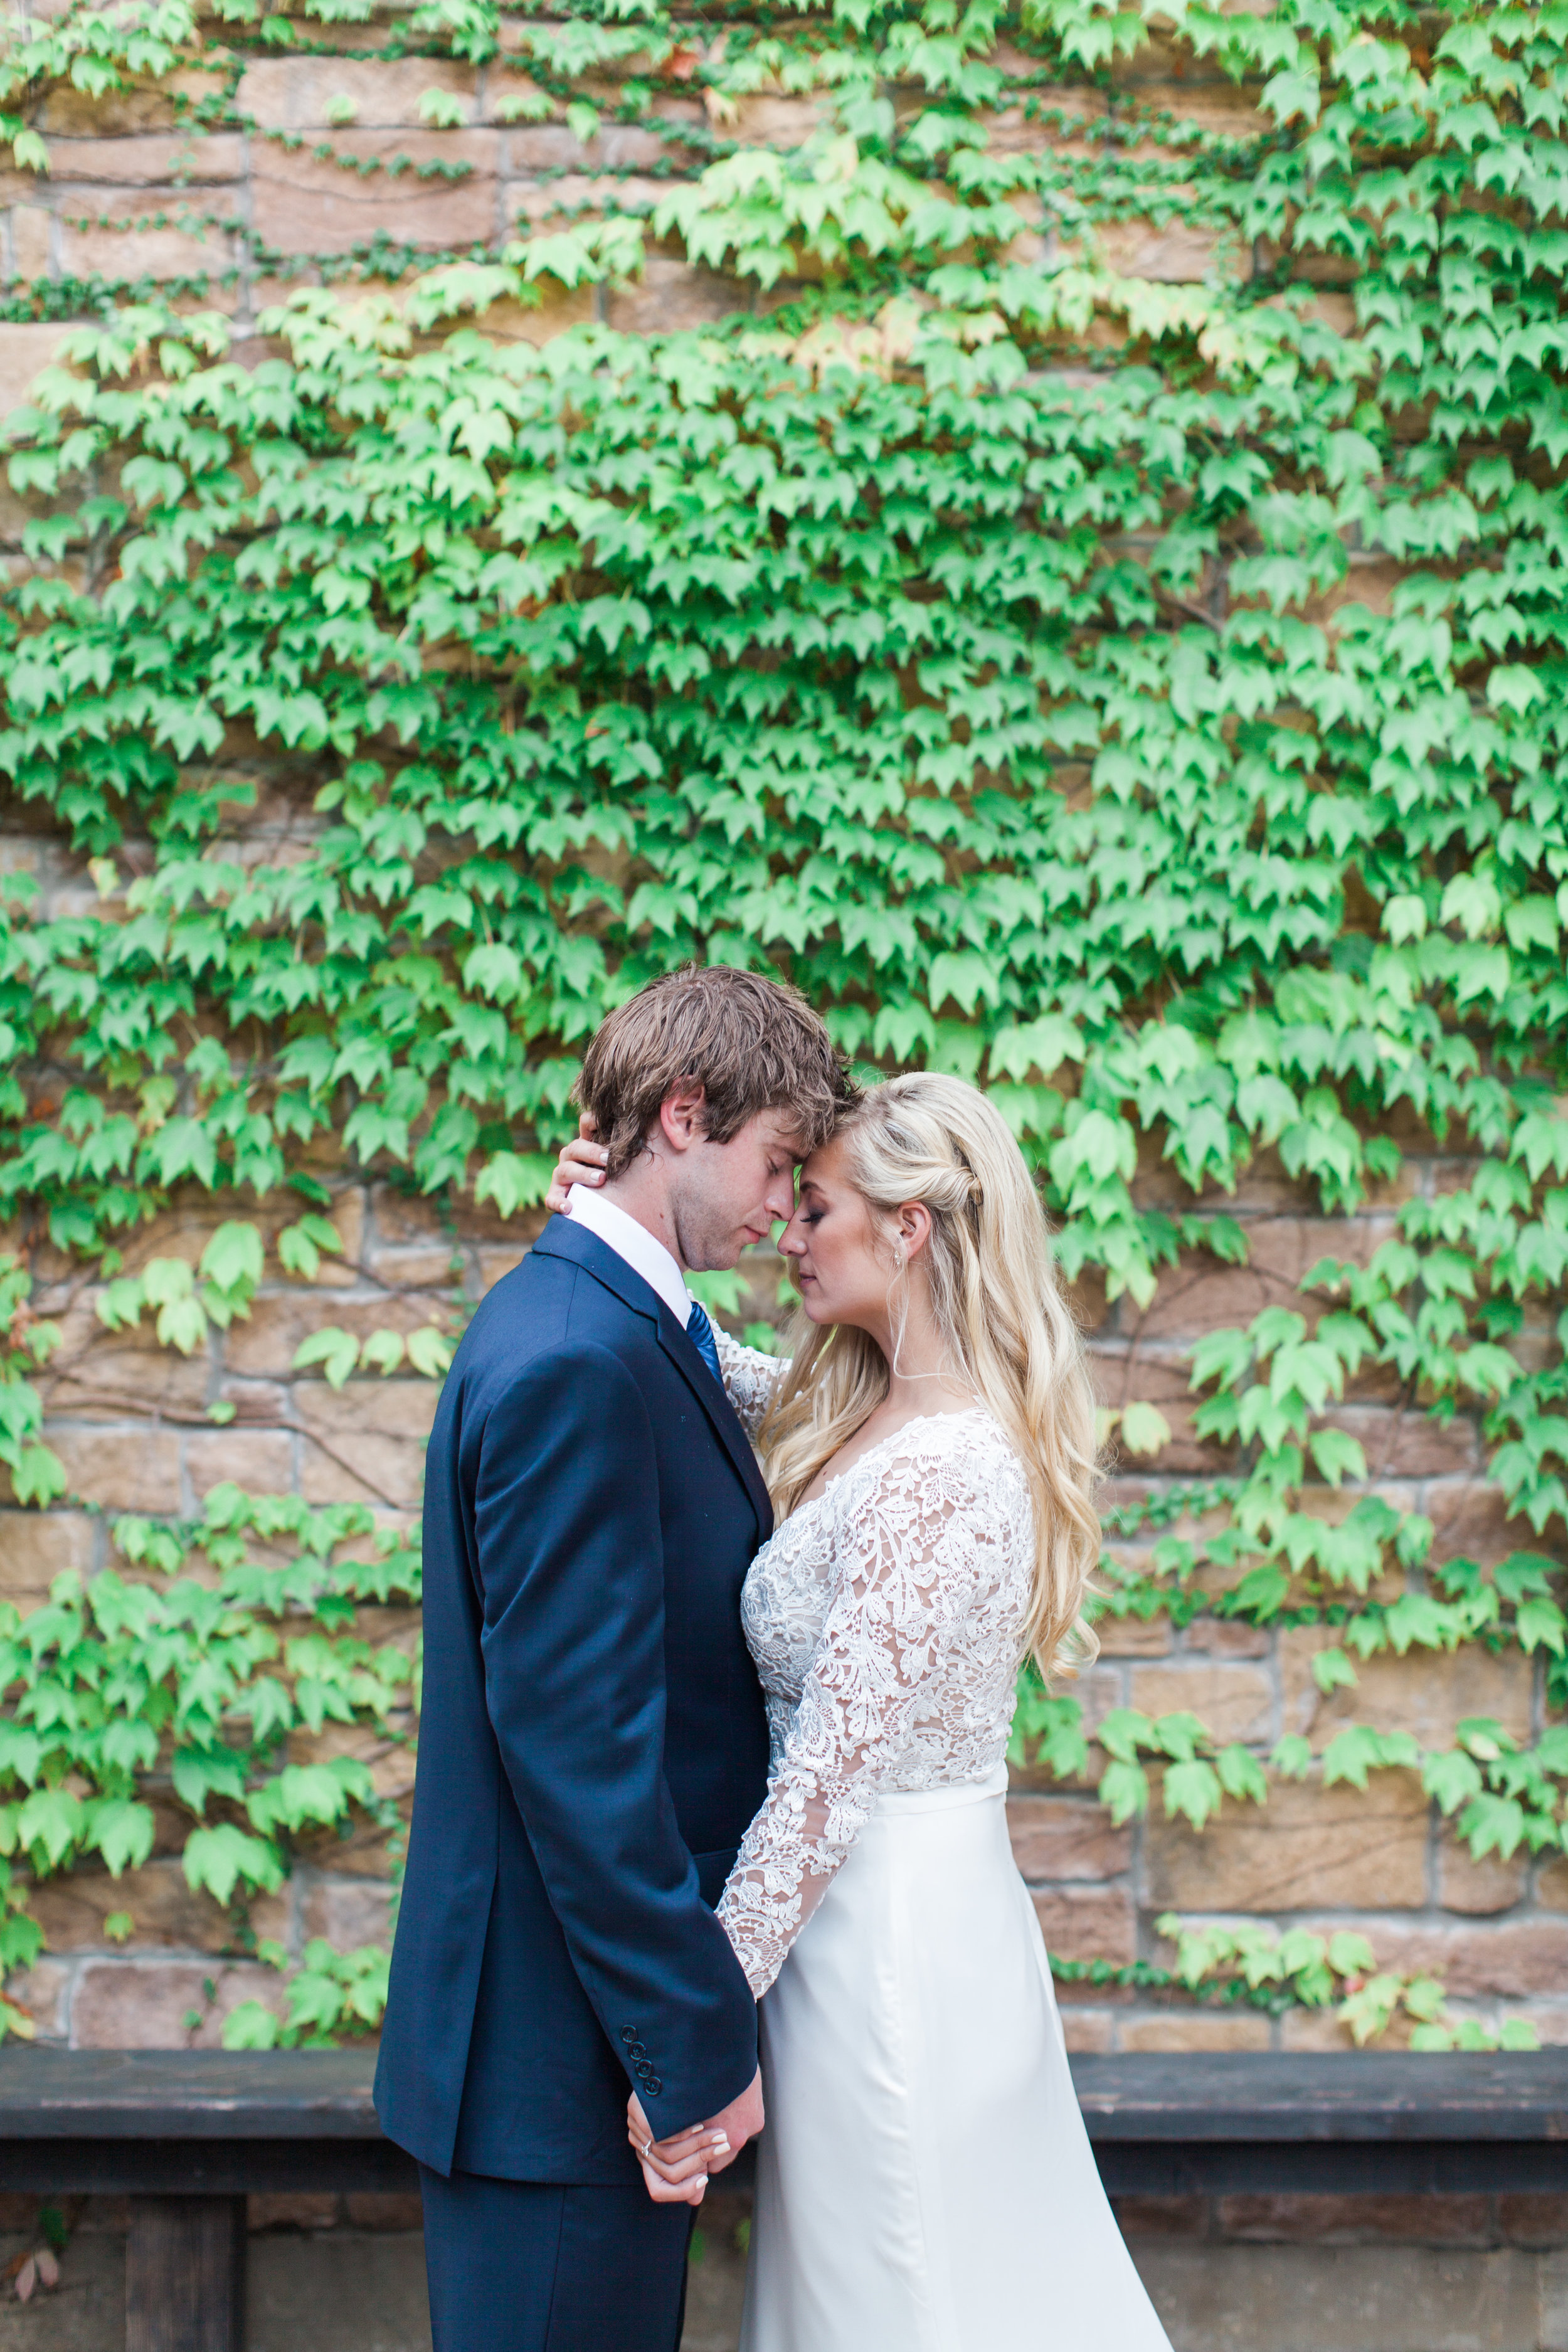 Organic, Greenery Wedding at Aristide with Jessica D'Onforio Photography